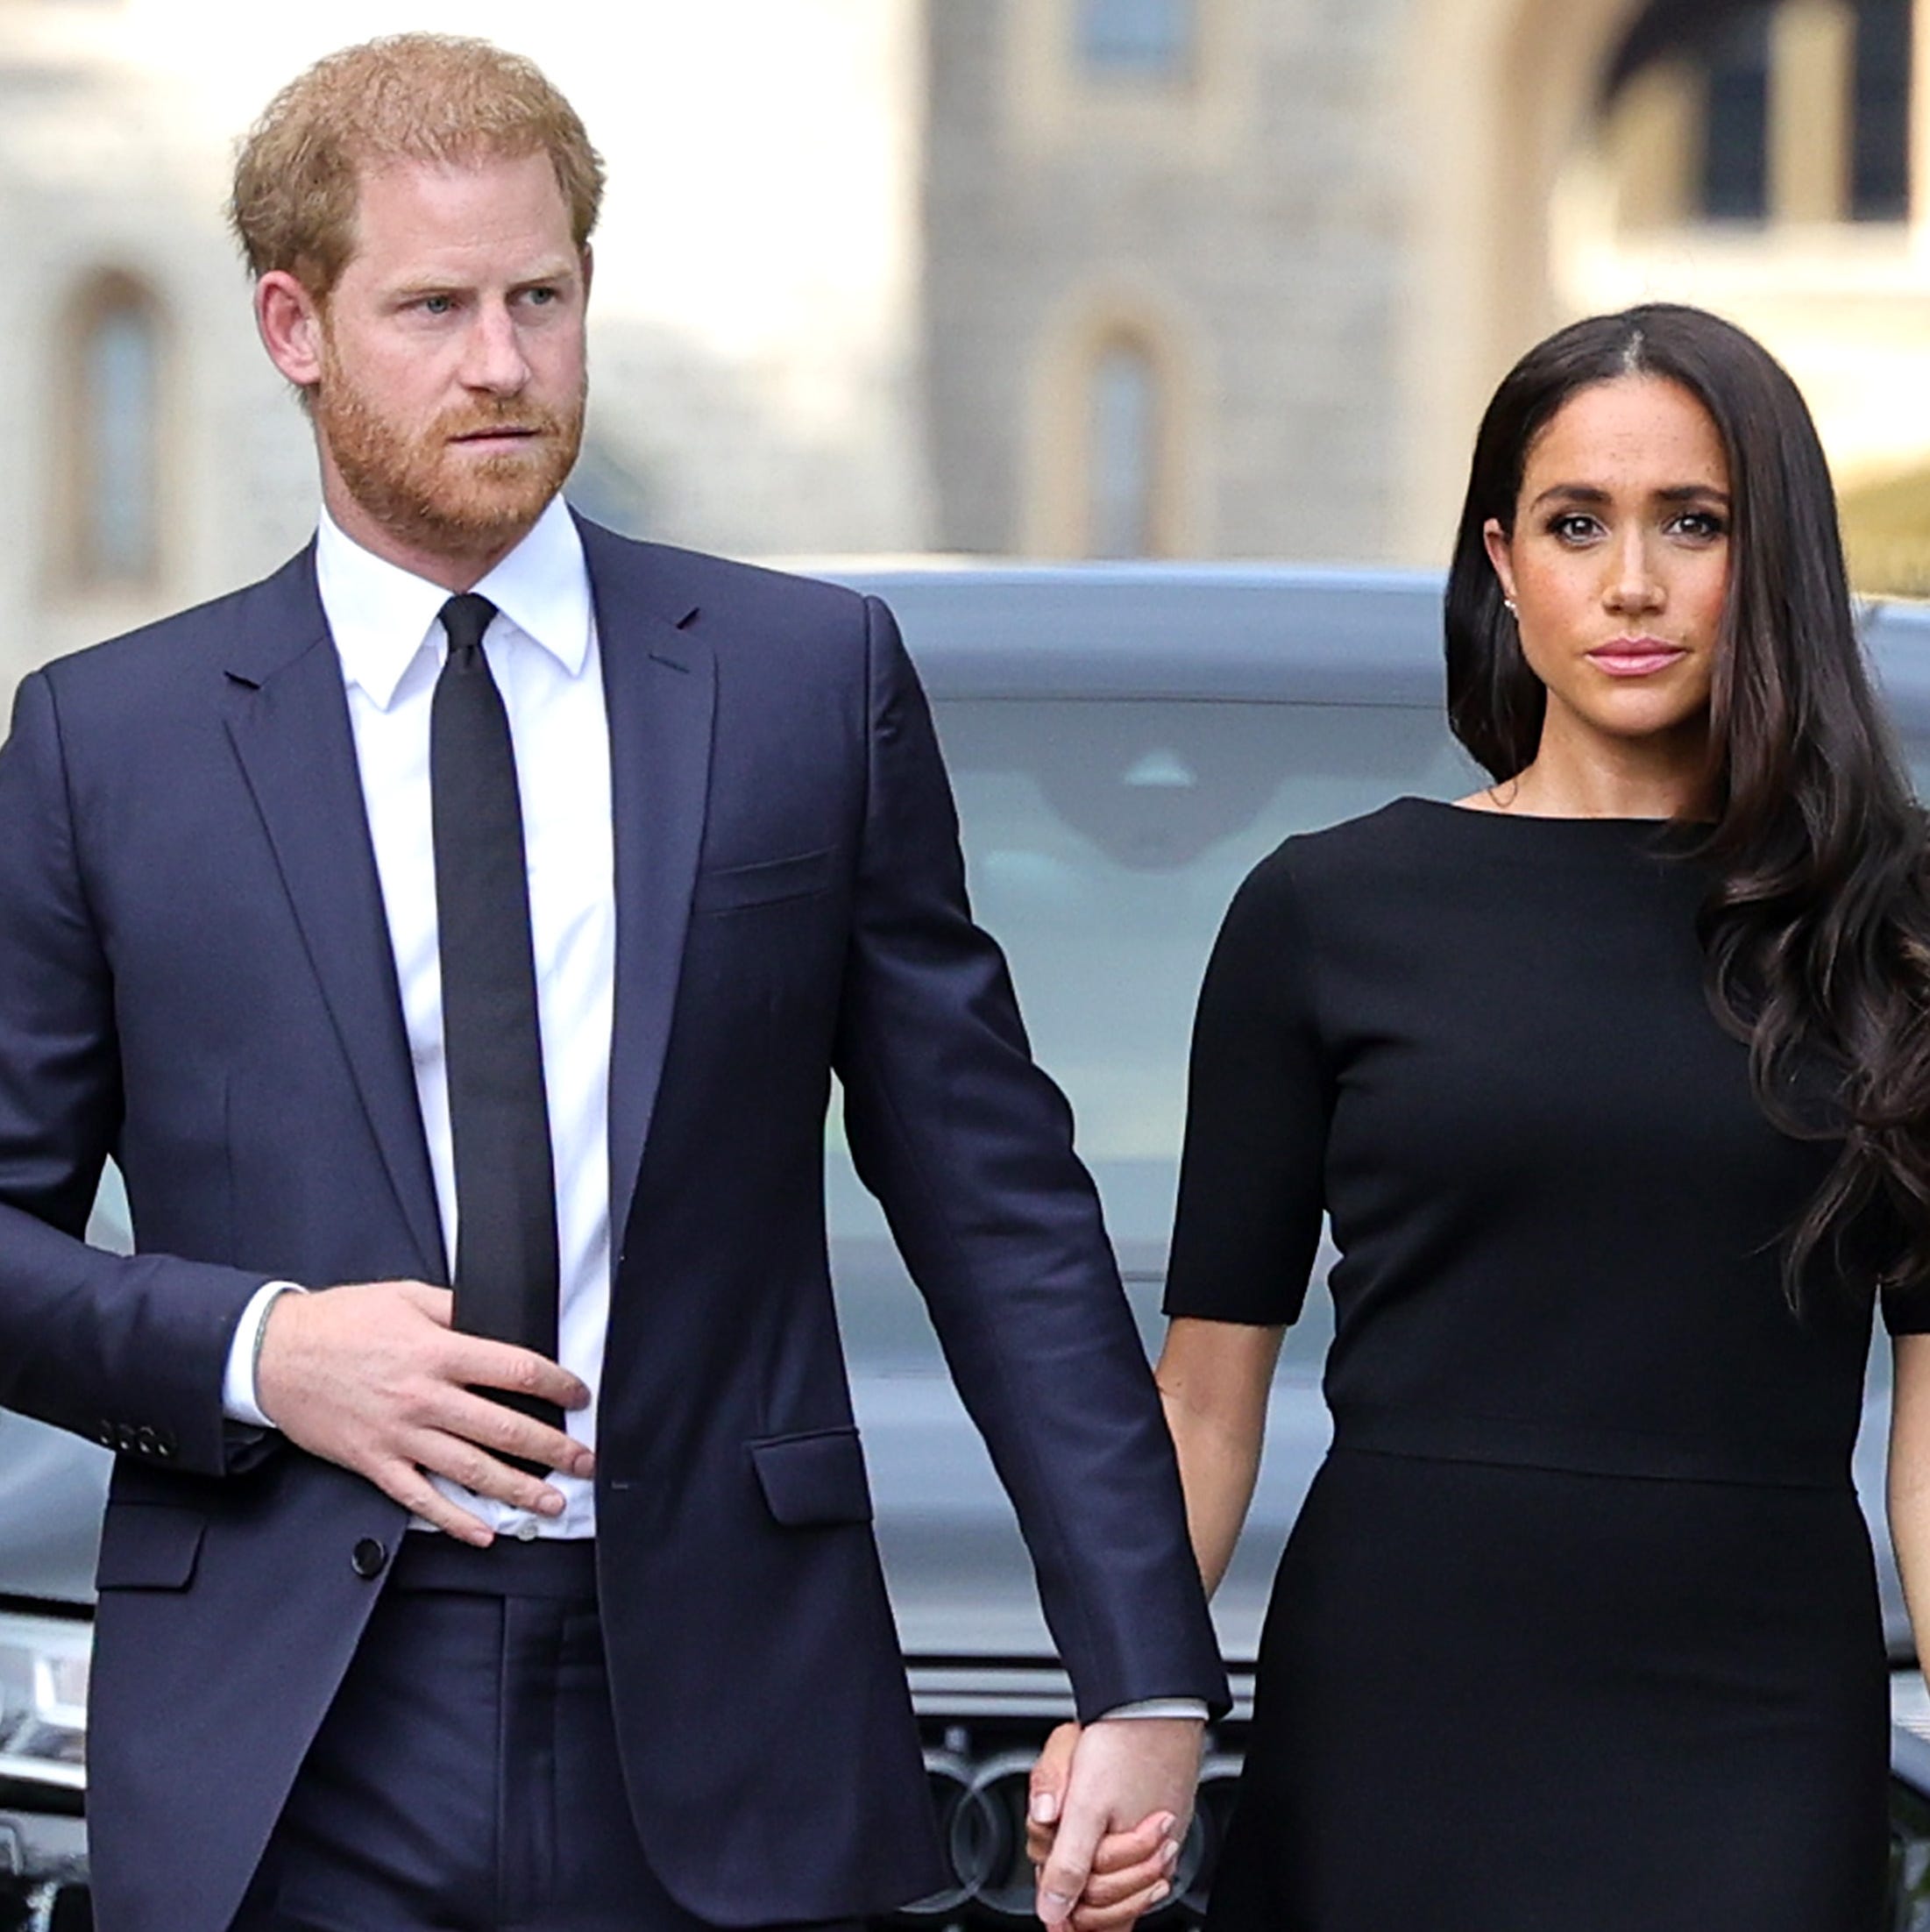 Harry and Meghan Apparently Learned They Were Uninvited from Buckingham Palace Reception from the Press